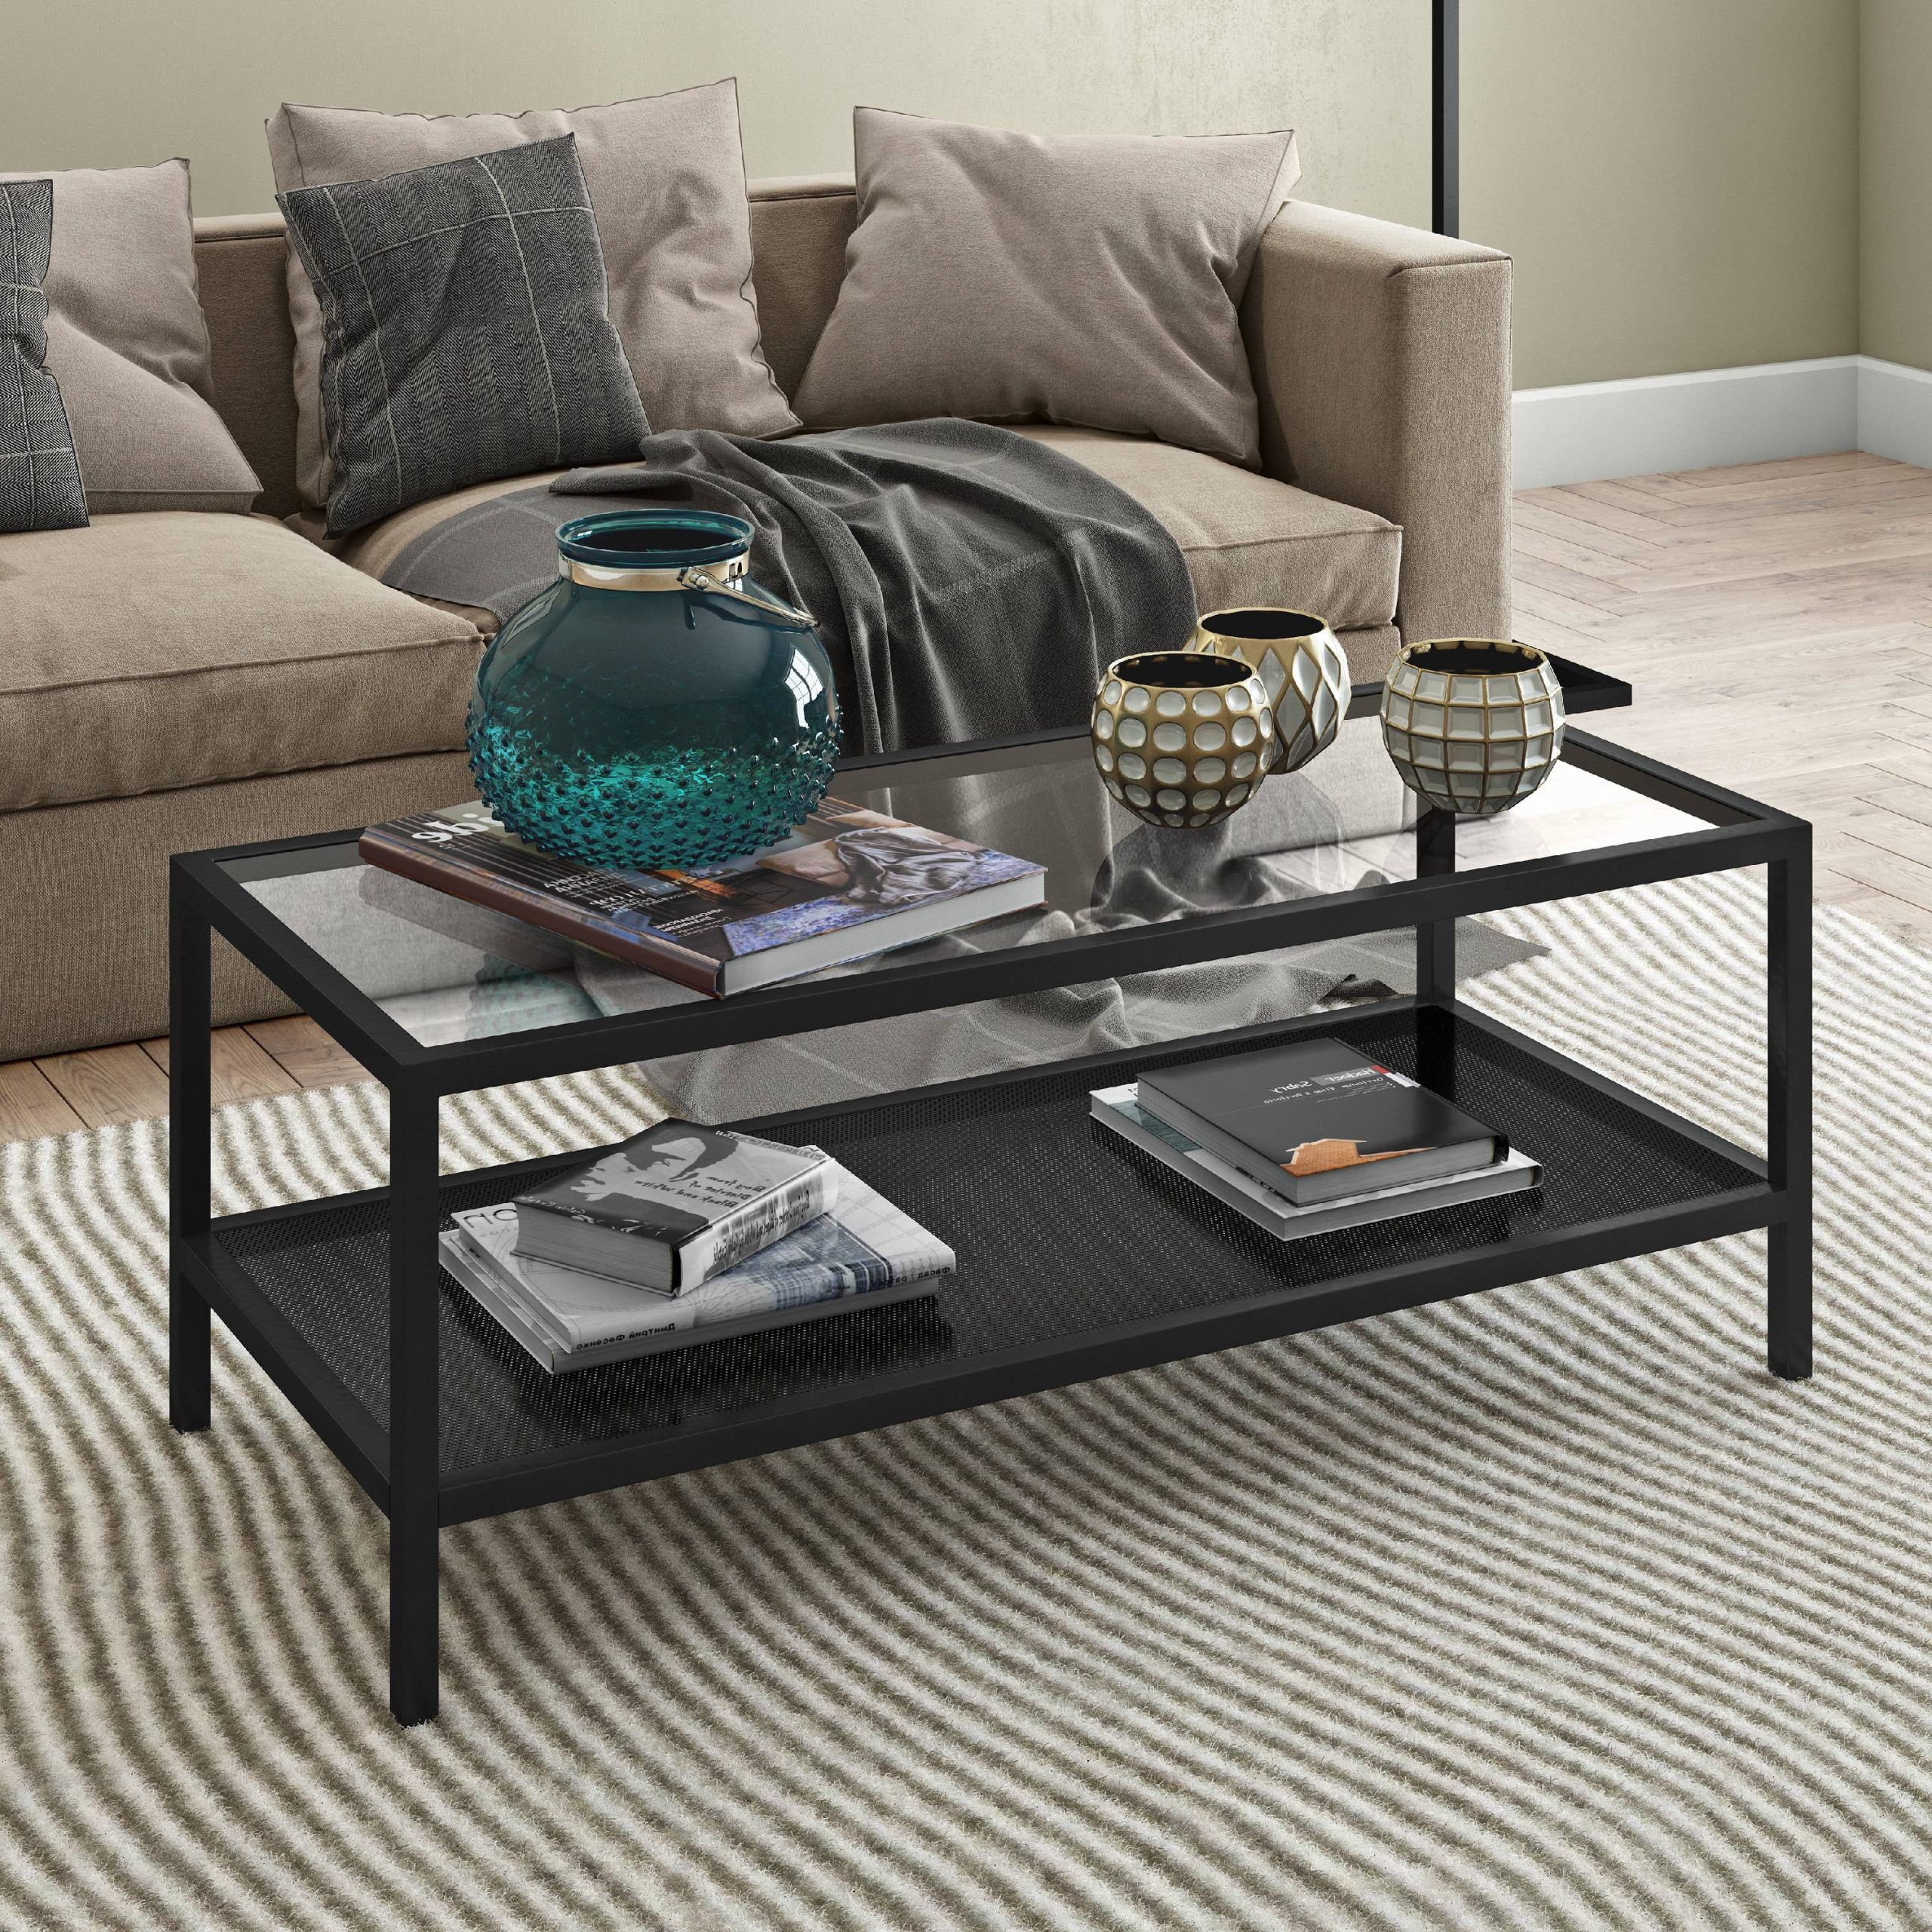 Evelyn&zoe Contemporary Metal Coffee Table With Glass Top – Walmart With Metal 1 Shelf Coffee Tables (View 2 of 20)